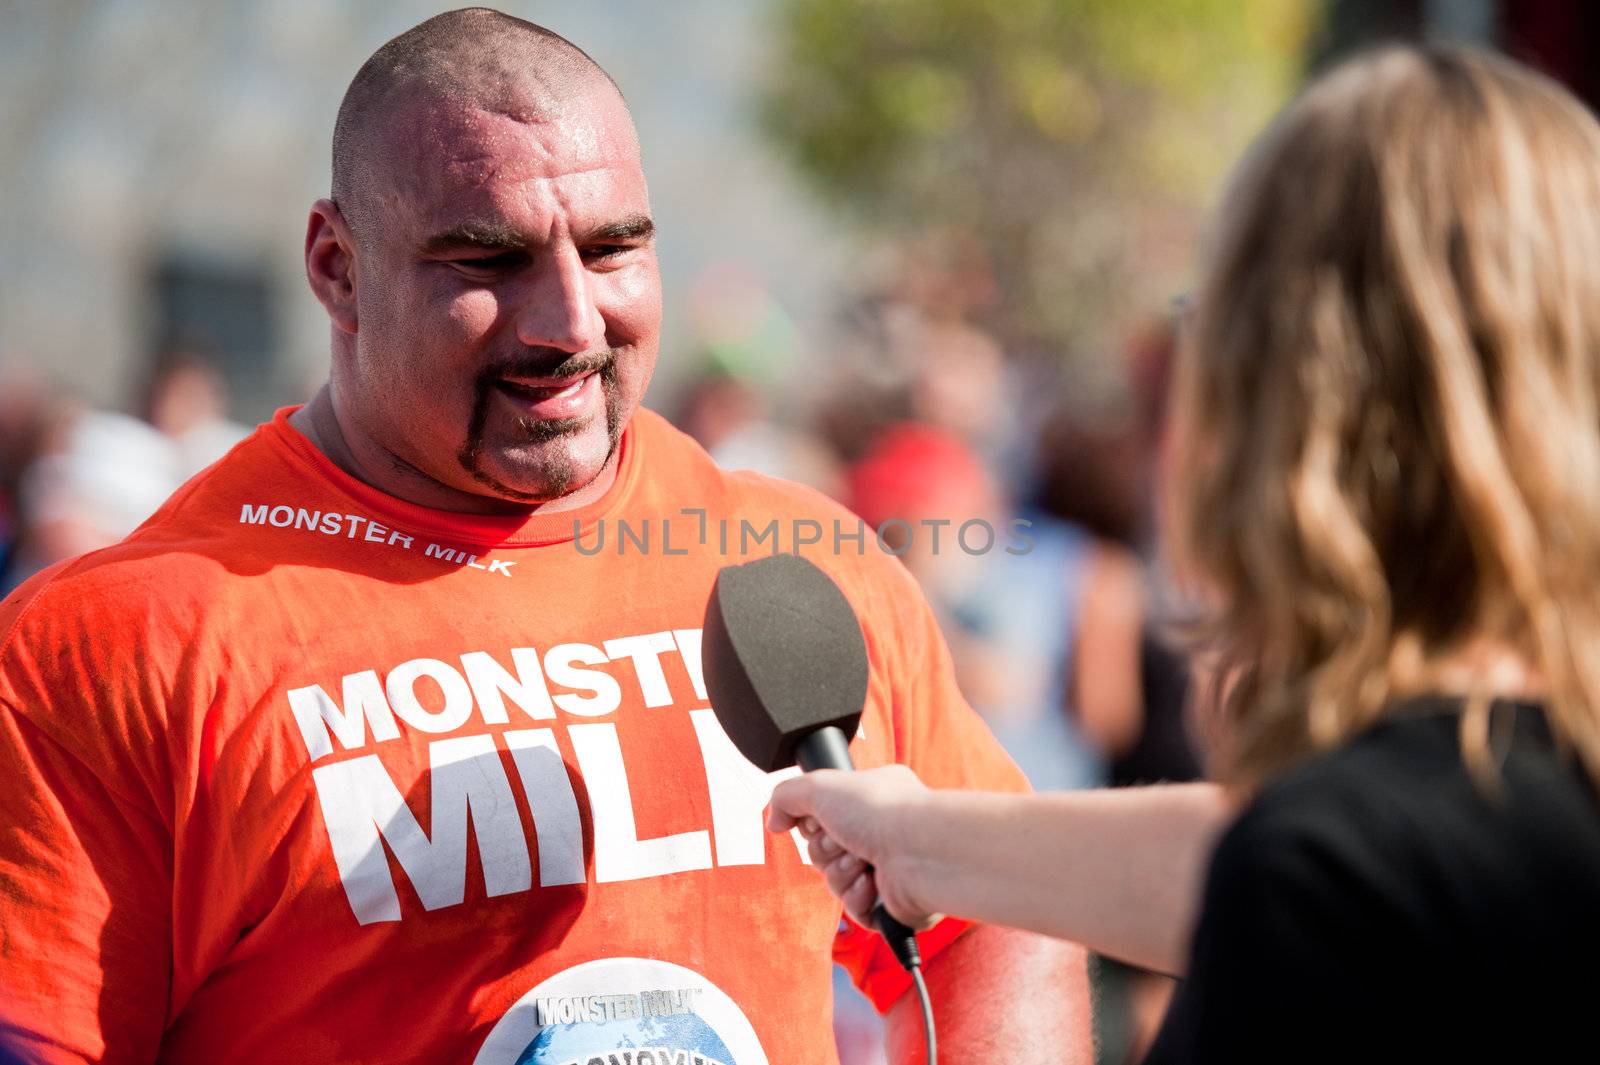 CANARY ISLANDS - SEPTEMBER 03: Ervin Katona from Serbia, with highest score, being interviewed during Strongman Champions League in Las Palmas September 03, 2011 in Canary Islands, Spain